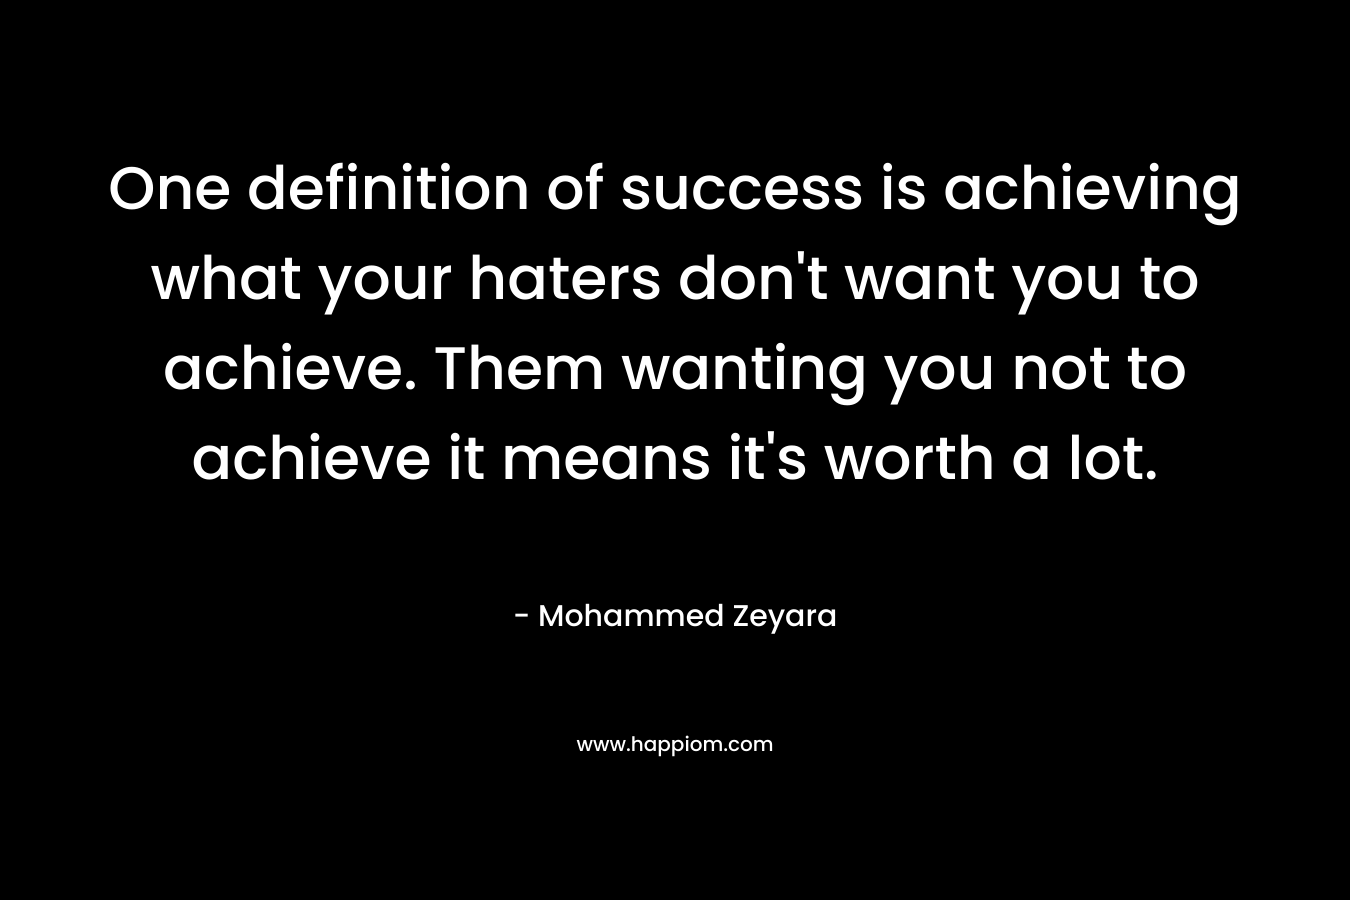 One definition of success is achieving what your haters don't want you to achieve. Them wanting you not to achieve it means it's worth a lot.